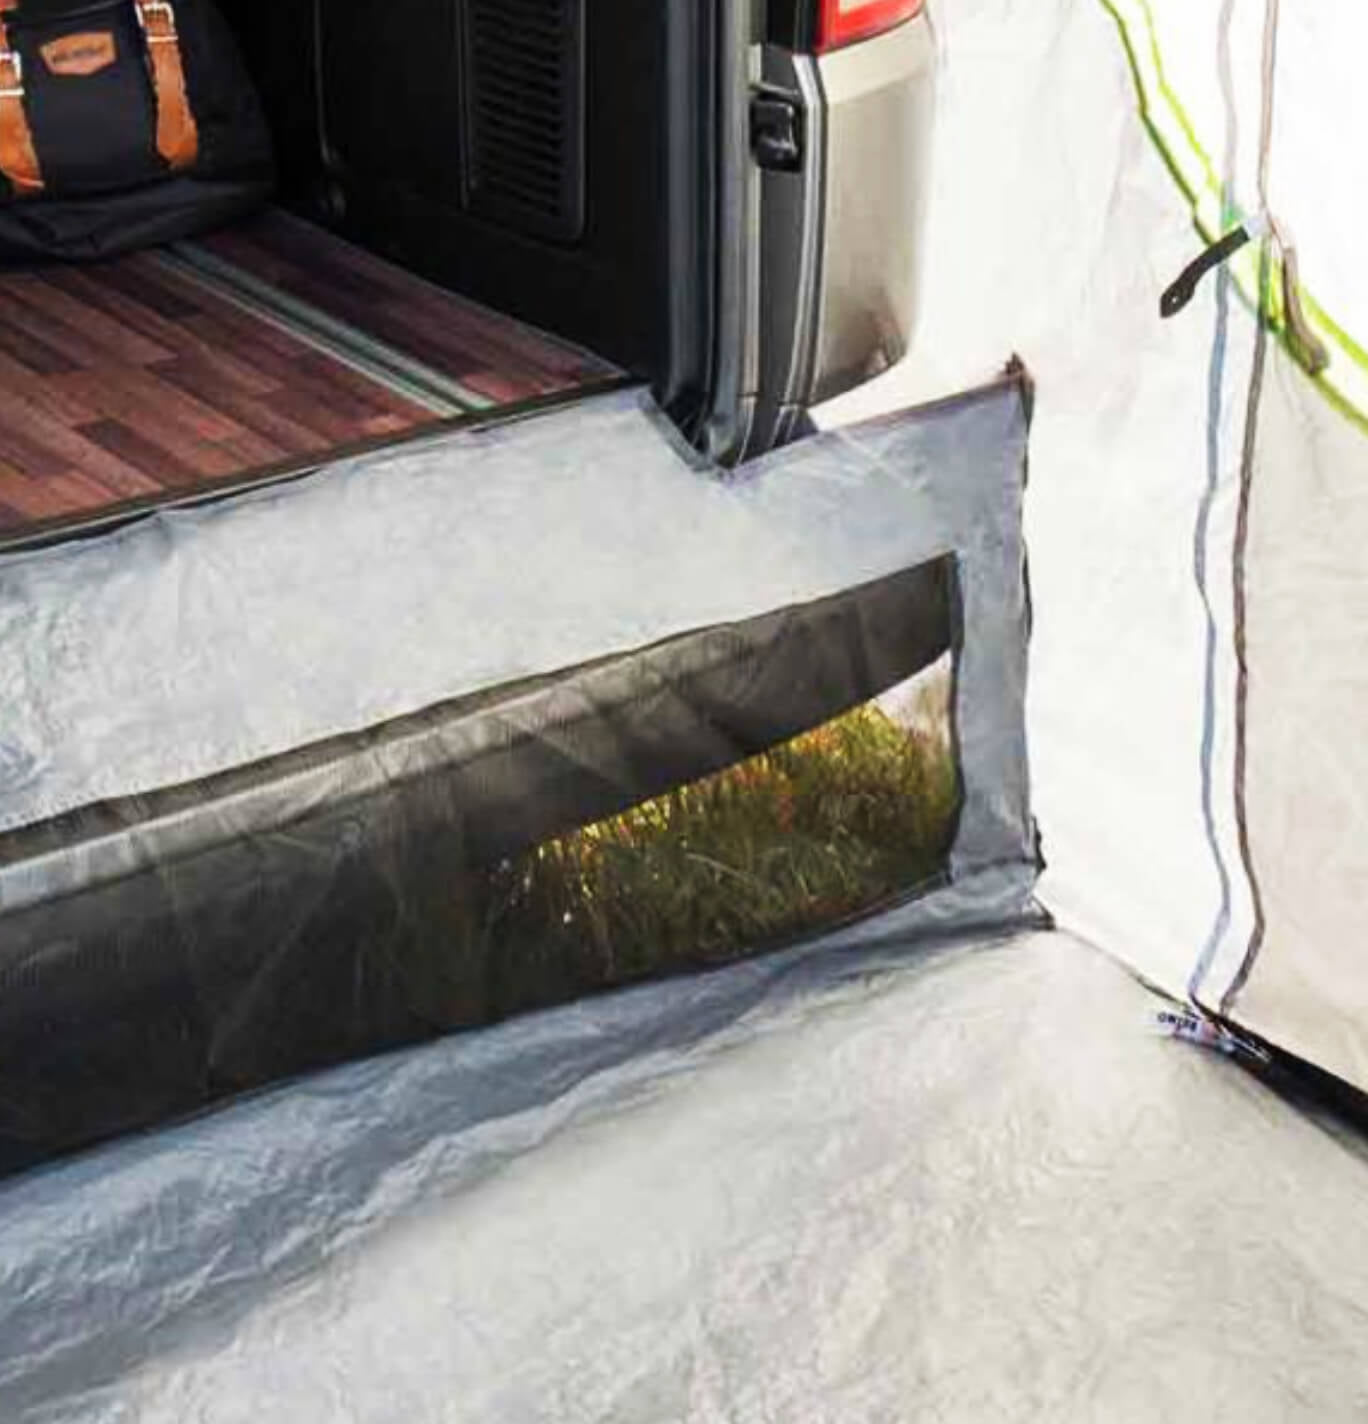 Offroad Tailgate tent VW-T5/6 - Eurotrail